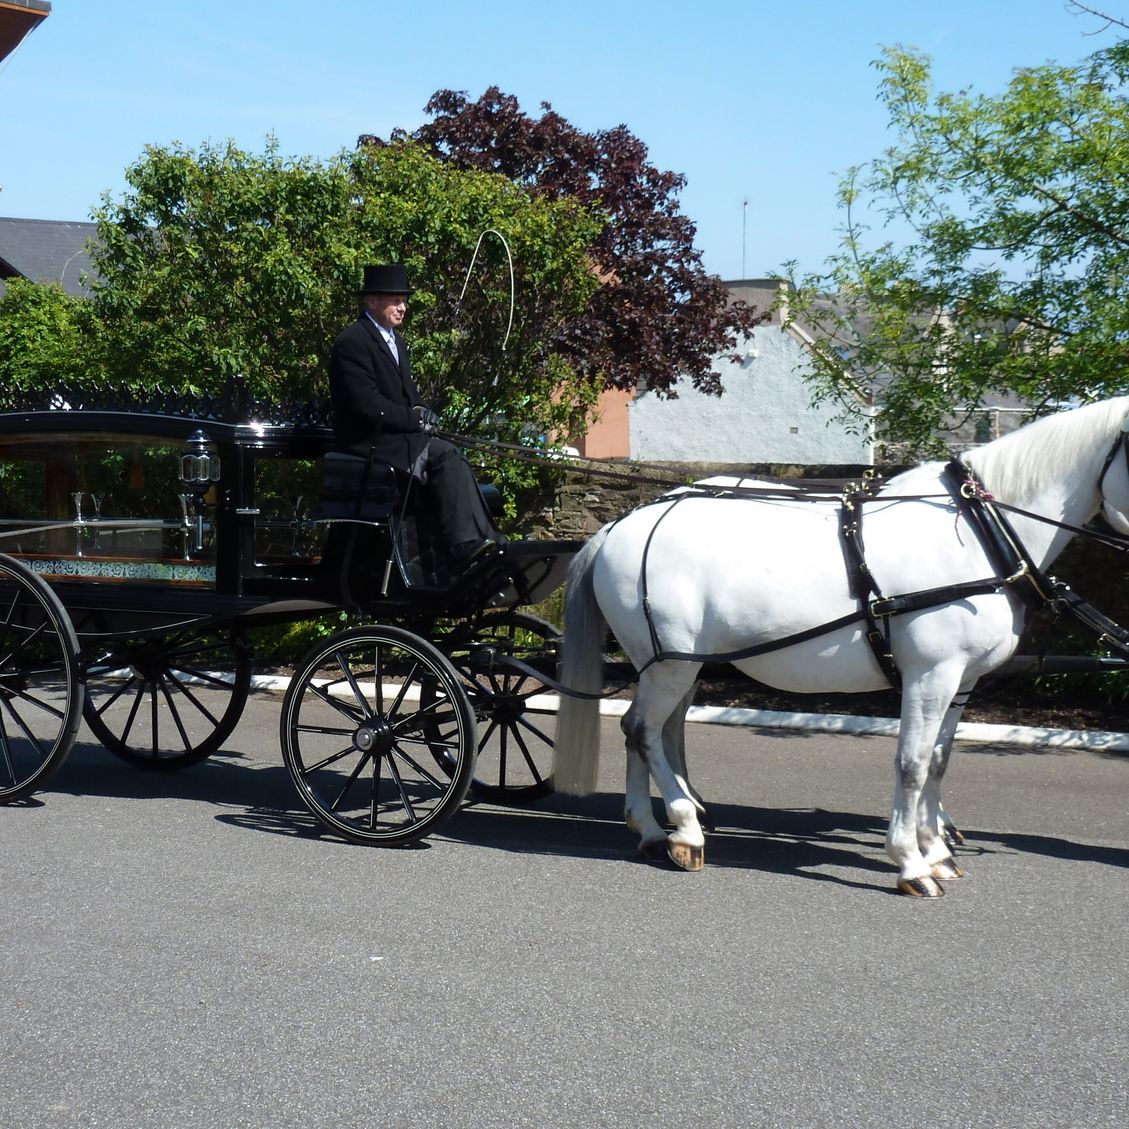 Horsedrawn Carriage